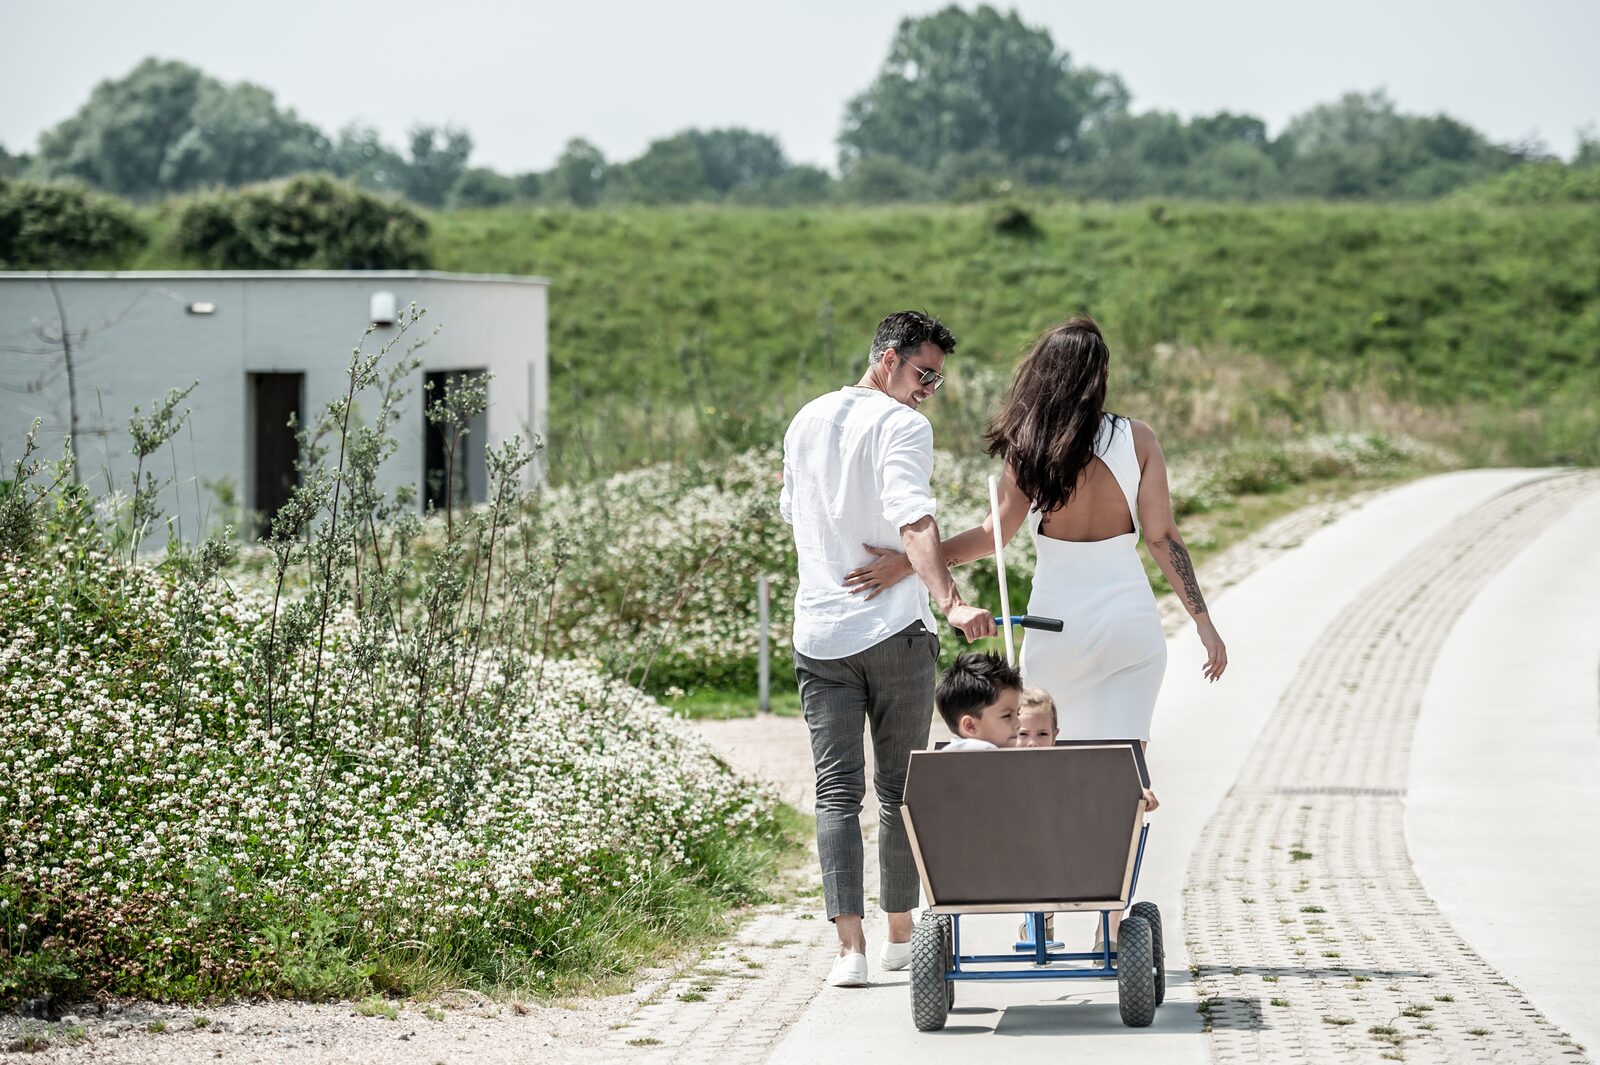 Luxury summer holiday by the sea in Zeeland